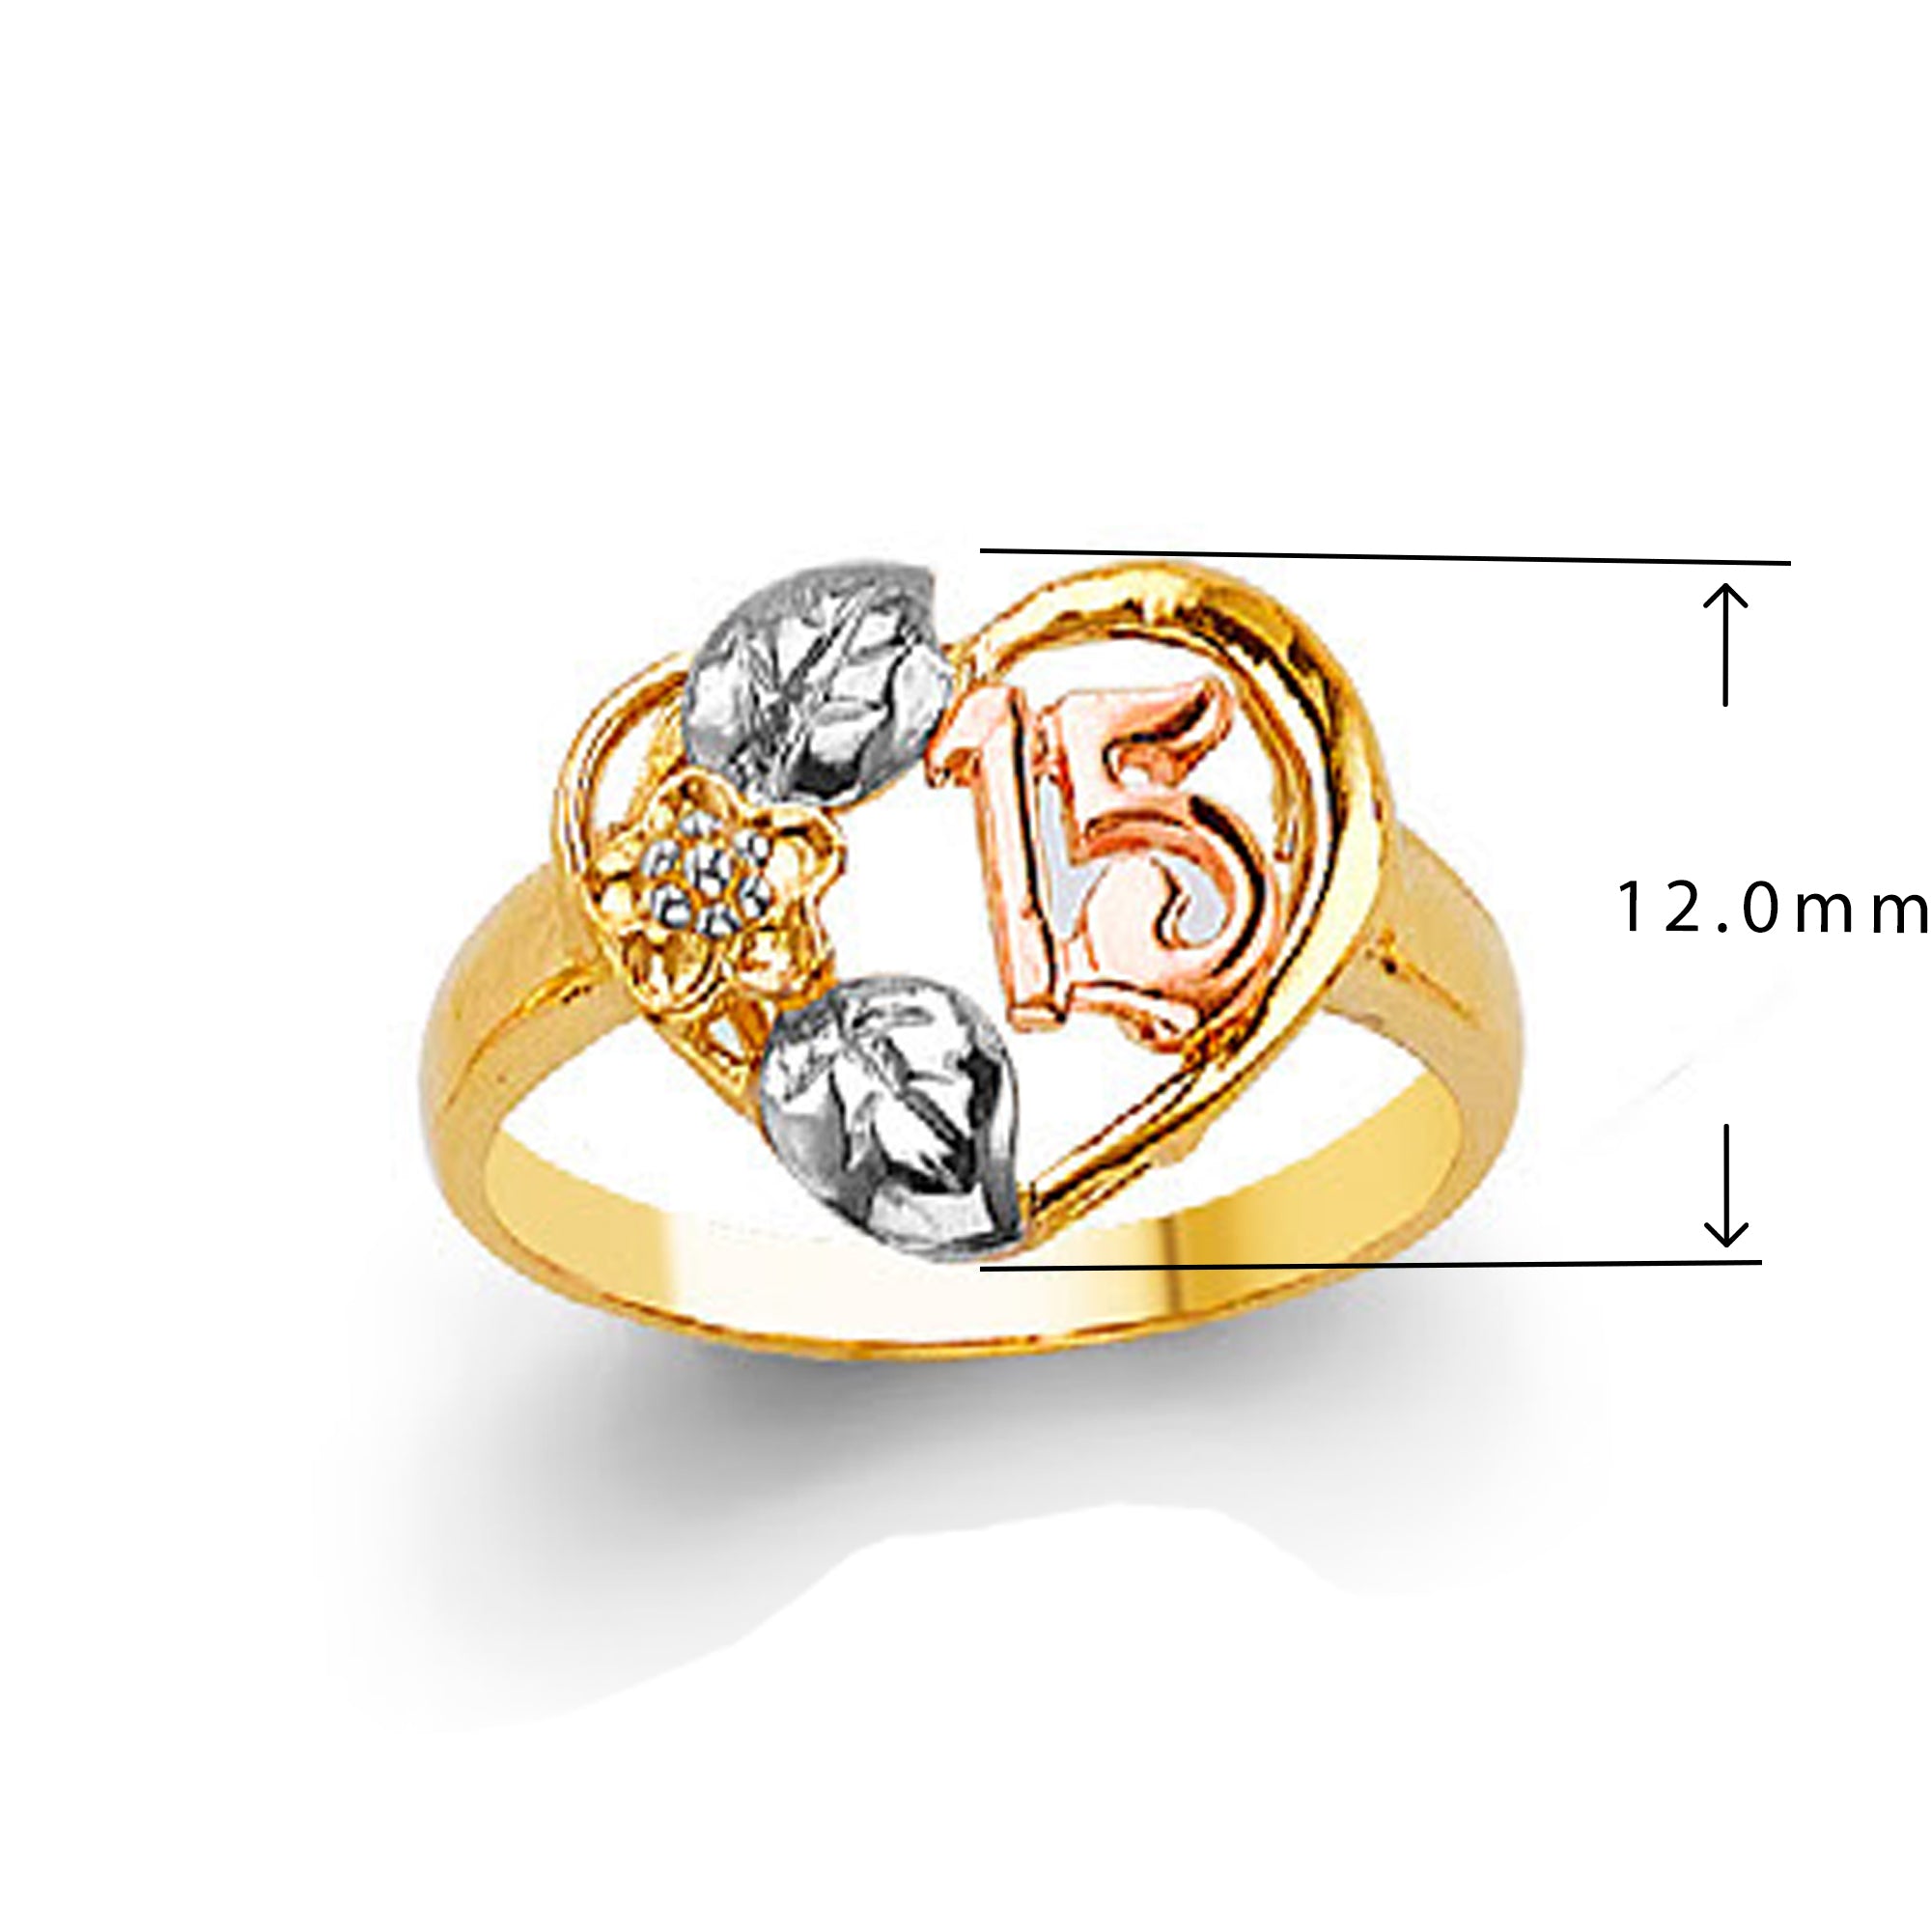 Tricolor Numeric Flower Ring in Solid Gold with Measurement